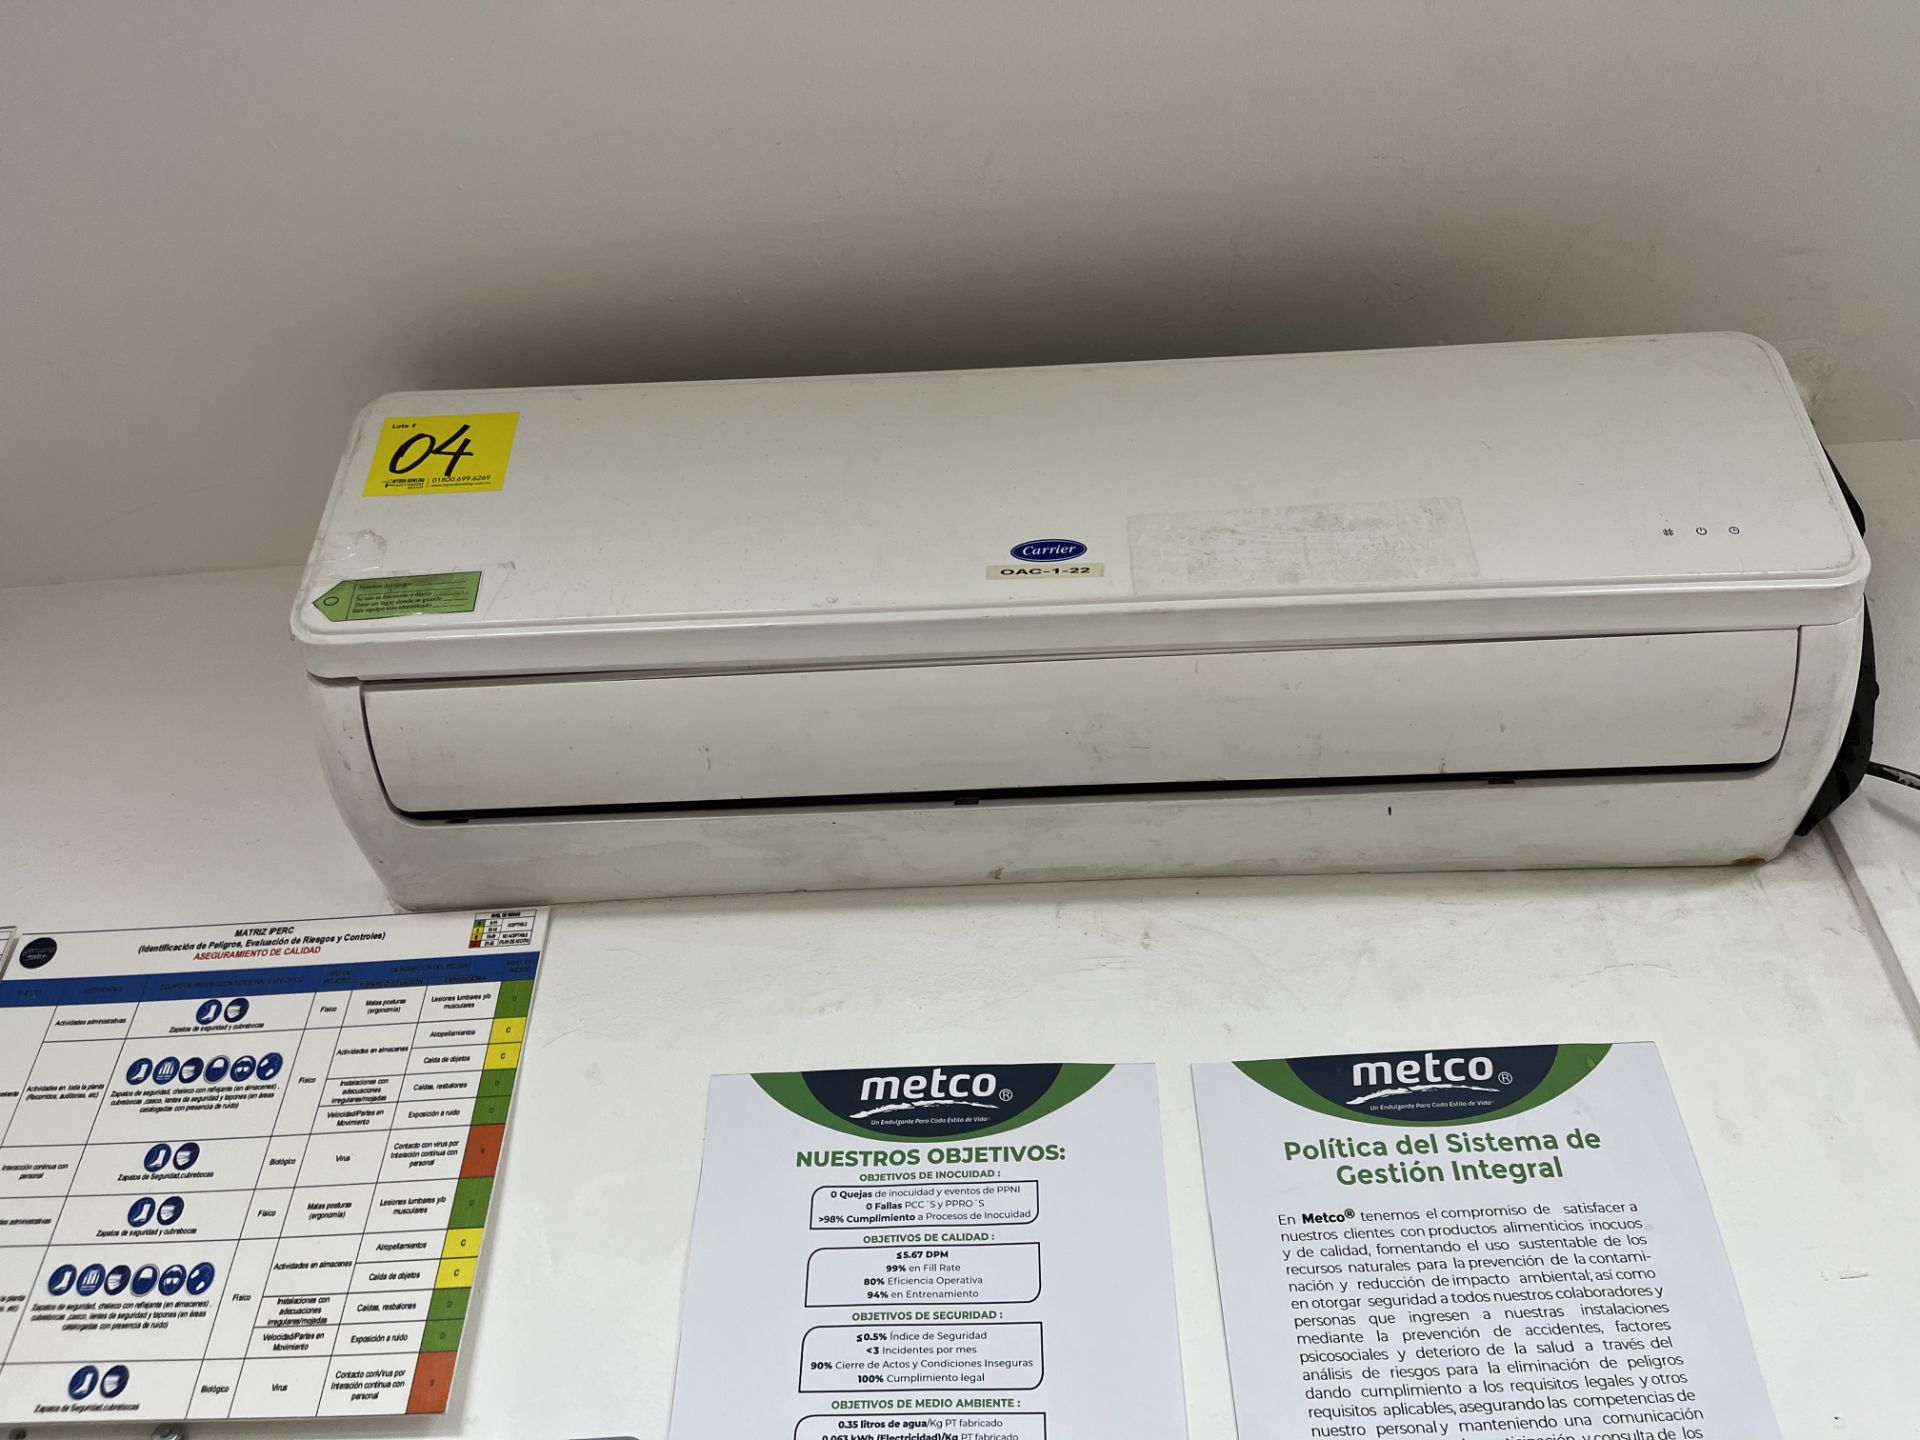 Lot of 2 minisplit air conditioners: 1 Carrier air conditioner, Model ND, ND Series, includes conde